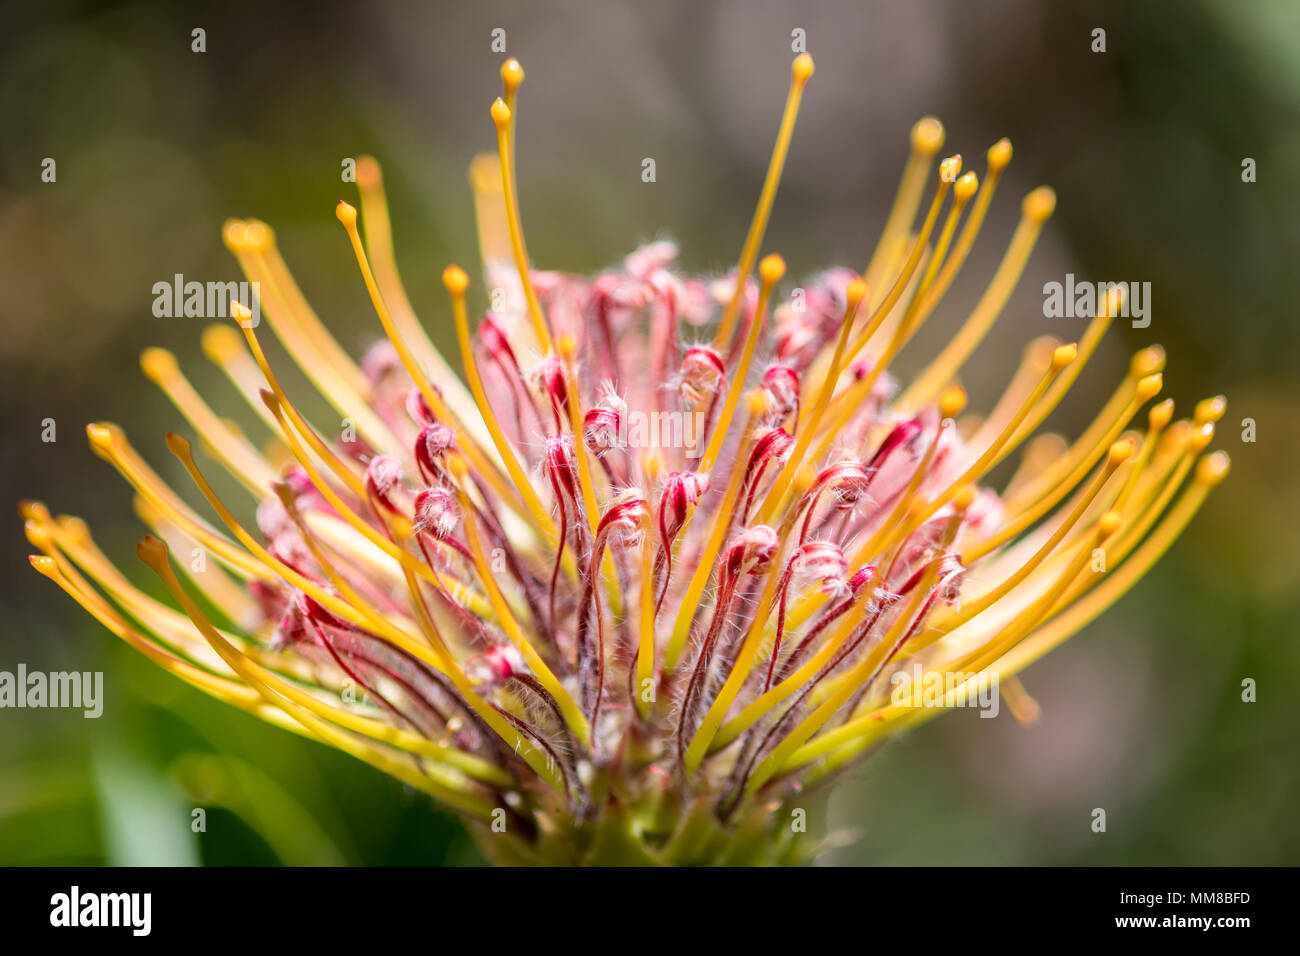 A close-up of a pincushion protea at the Kirstenbosch Botanical Gardens in Cape Town, South Africa Stock Photo